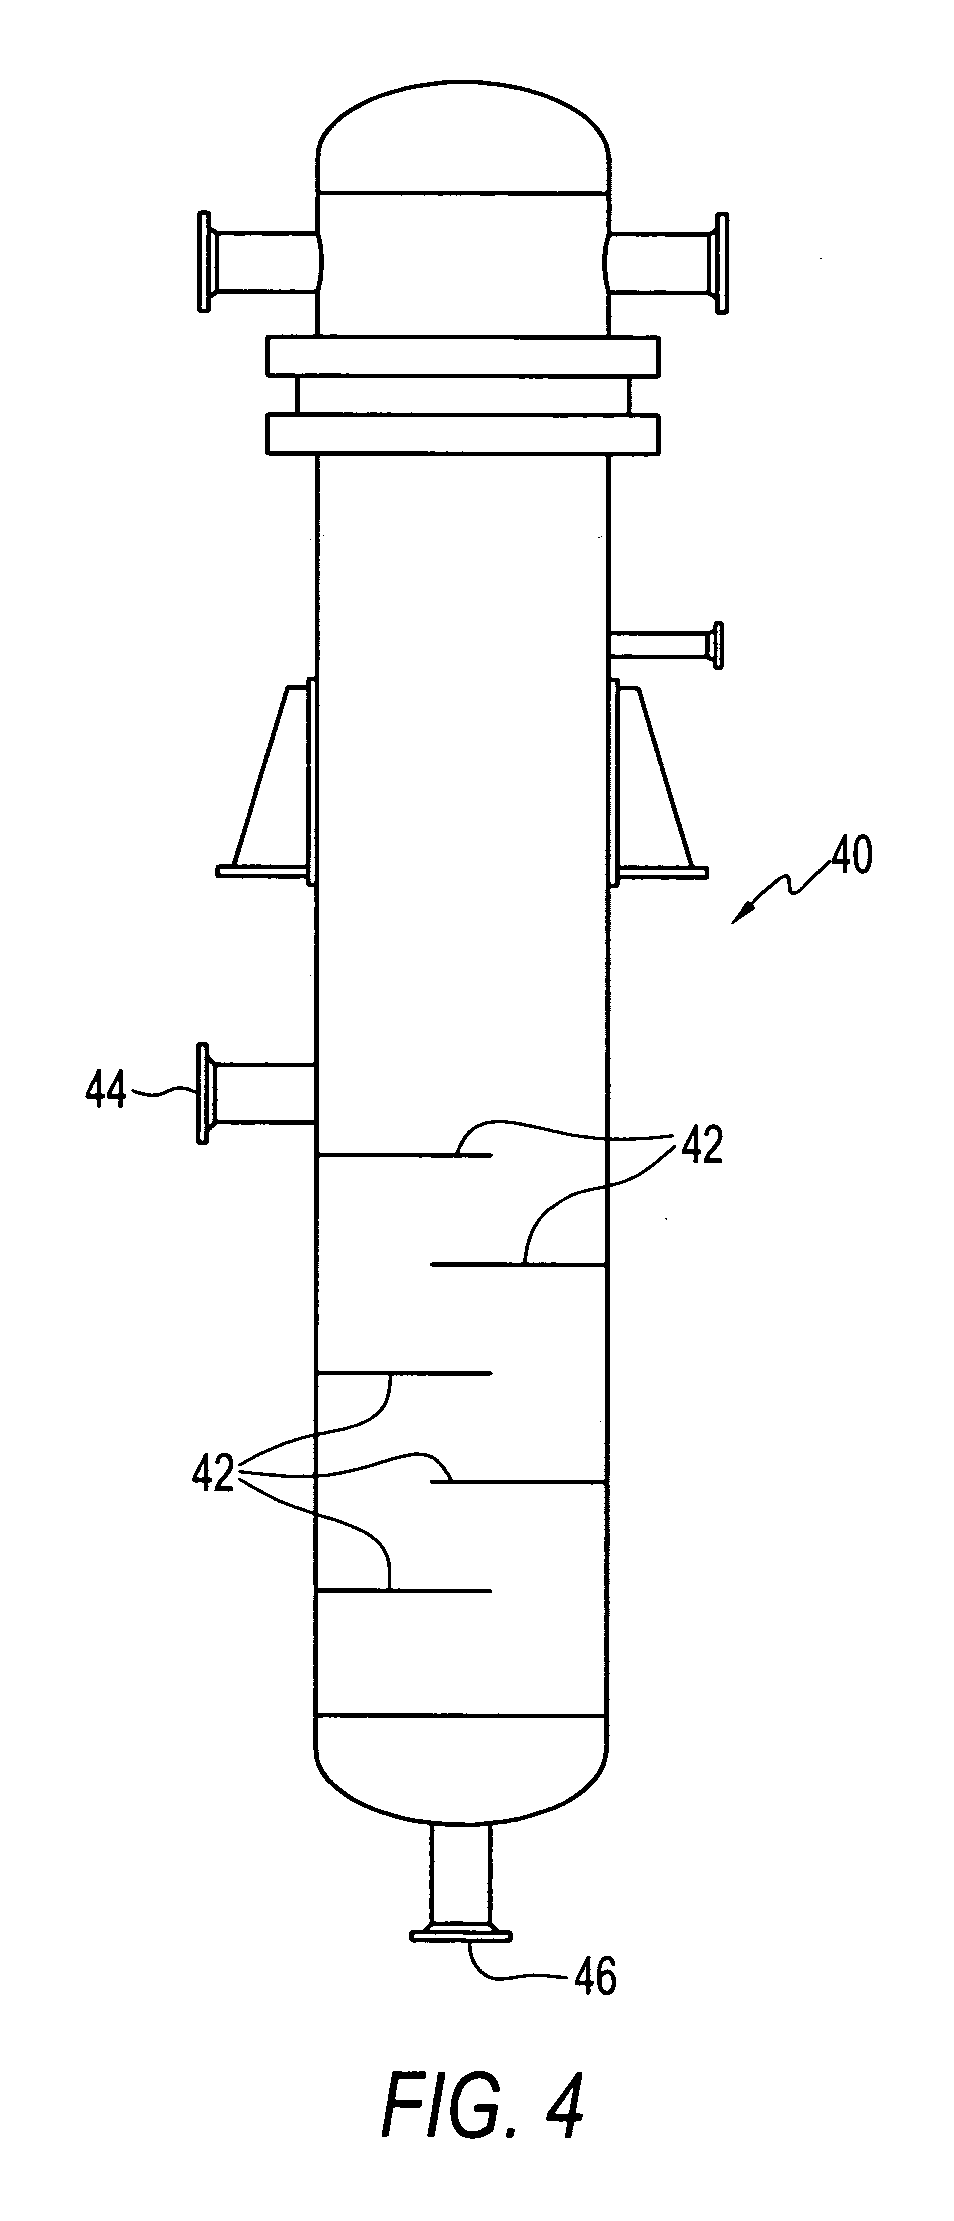 Method and apparatus for in-process handling of cumene hydroperoxide with improved safety